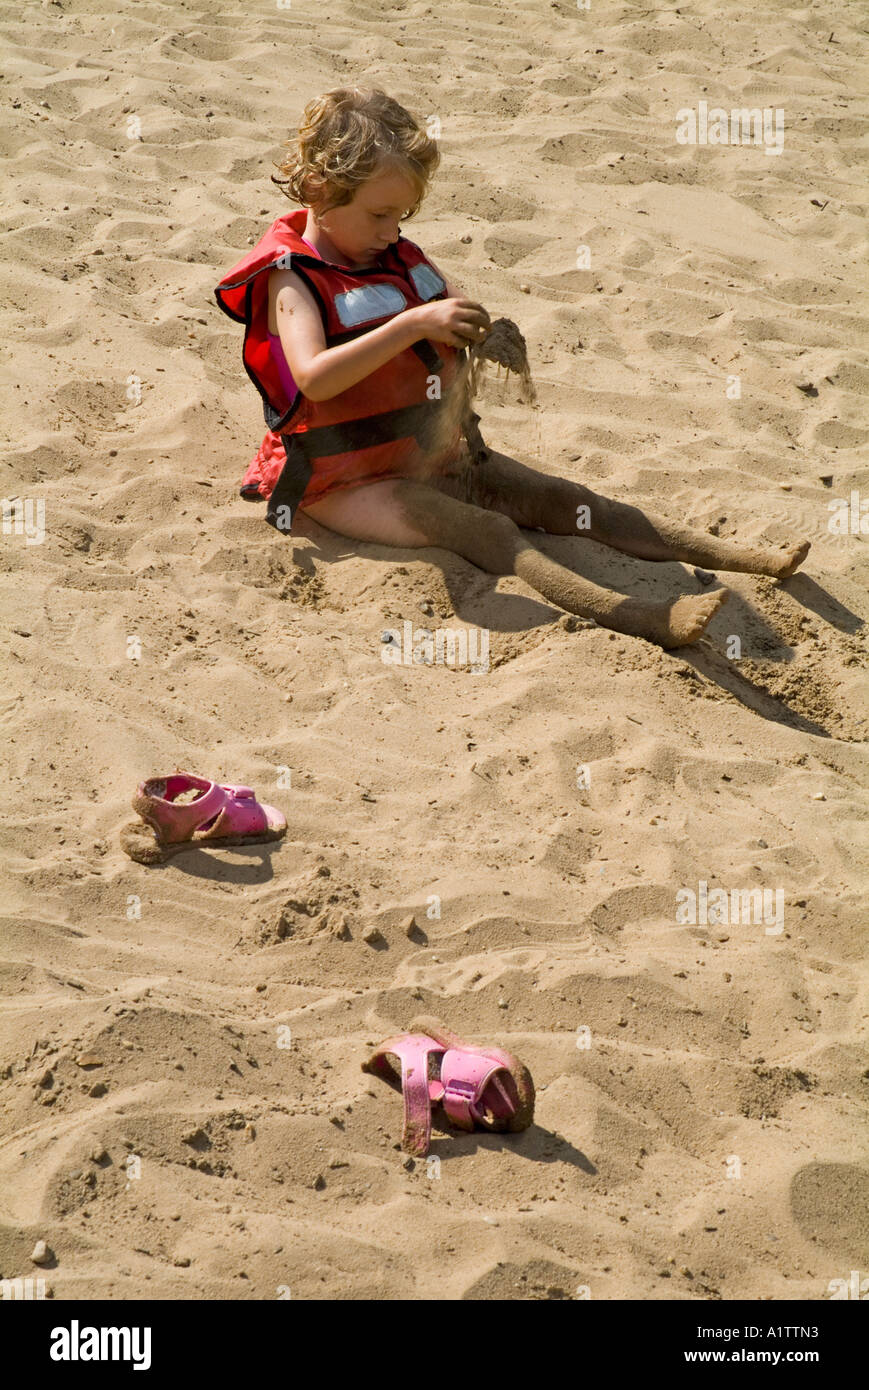 Little girl playing in the sand Stock Photo